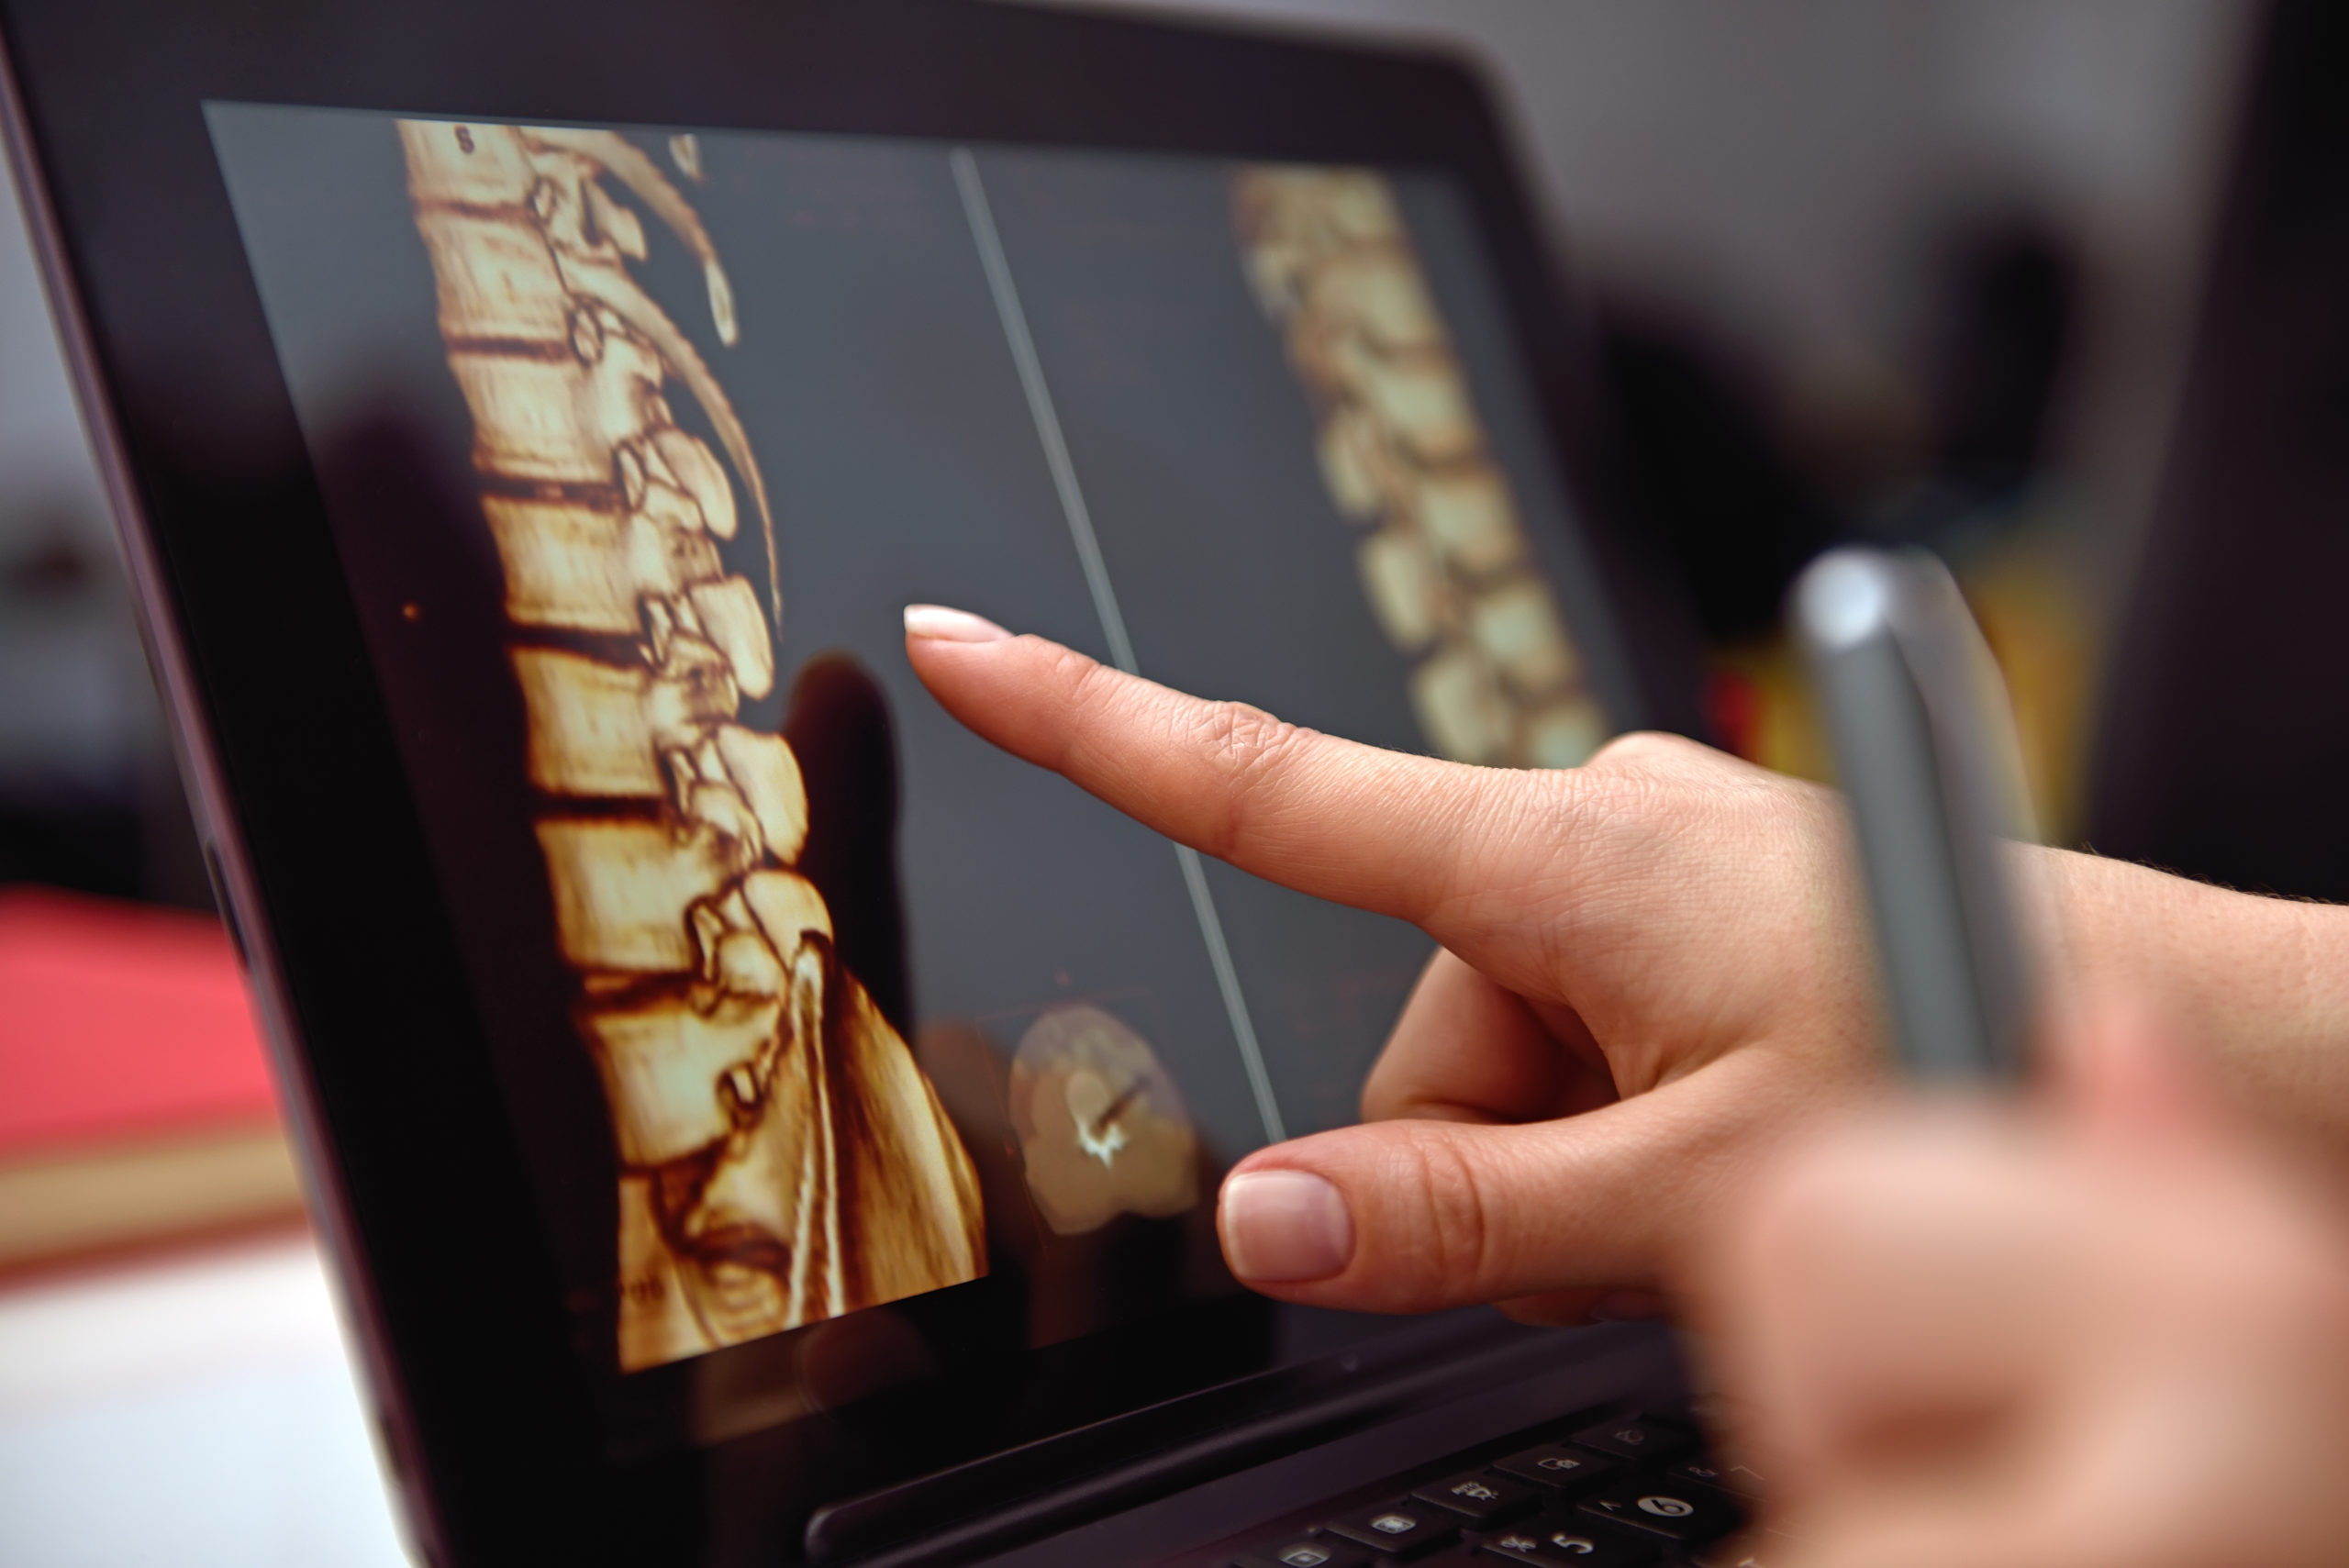 what is laser spine surgery?